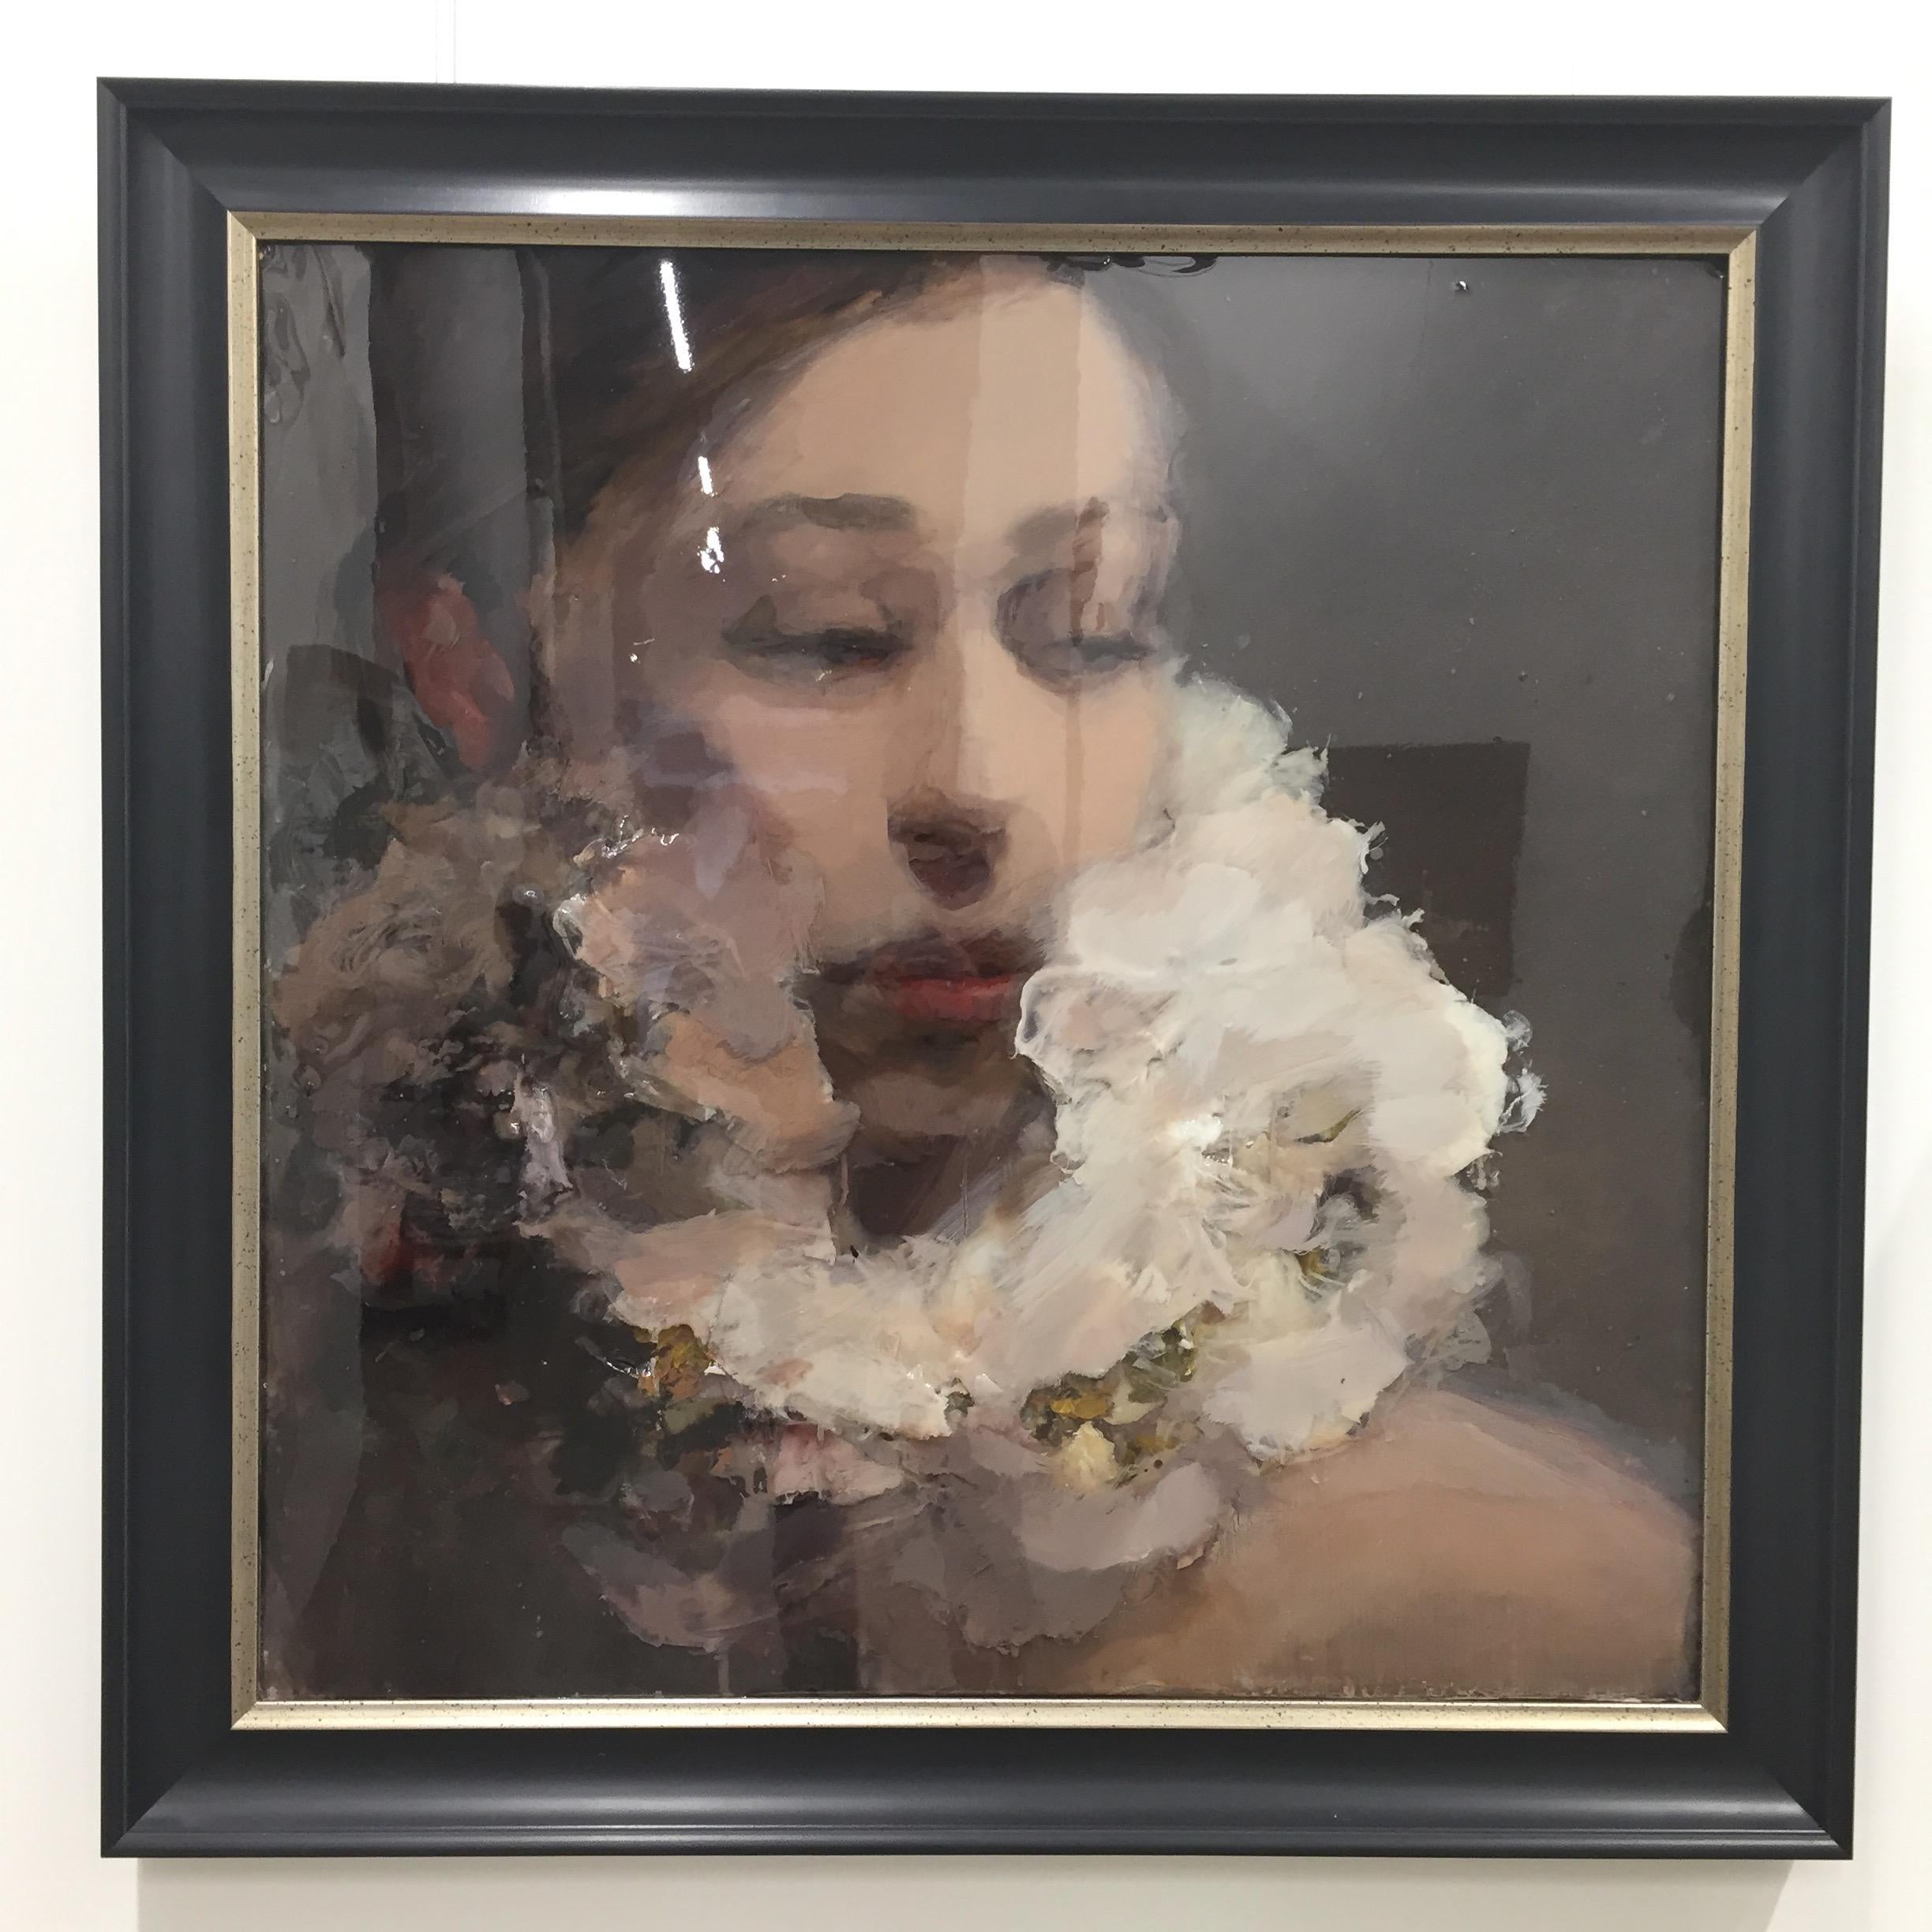 Soft, 21st Century portrait painting, Acrylic & Epoxy layers by Anne-Rixt Kuik - Painting by Anne Rixt Kuik